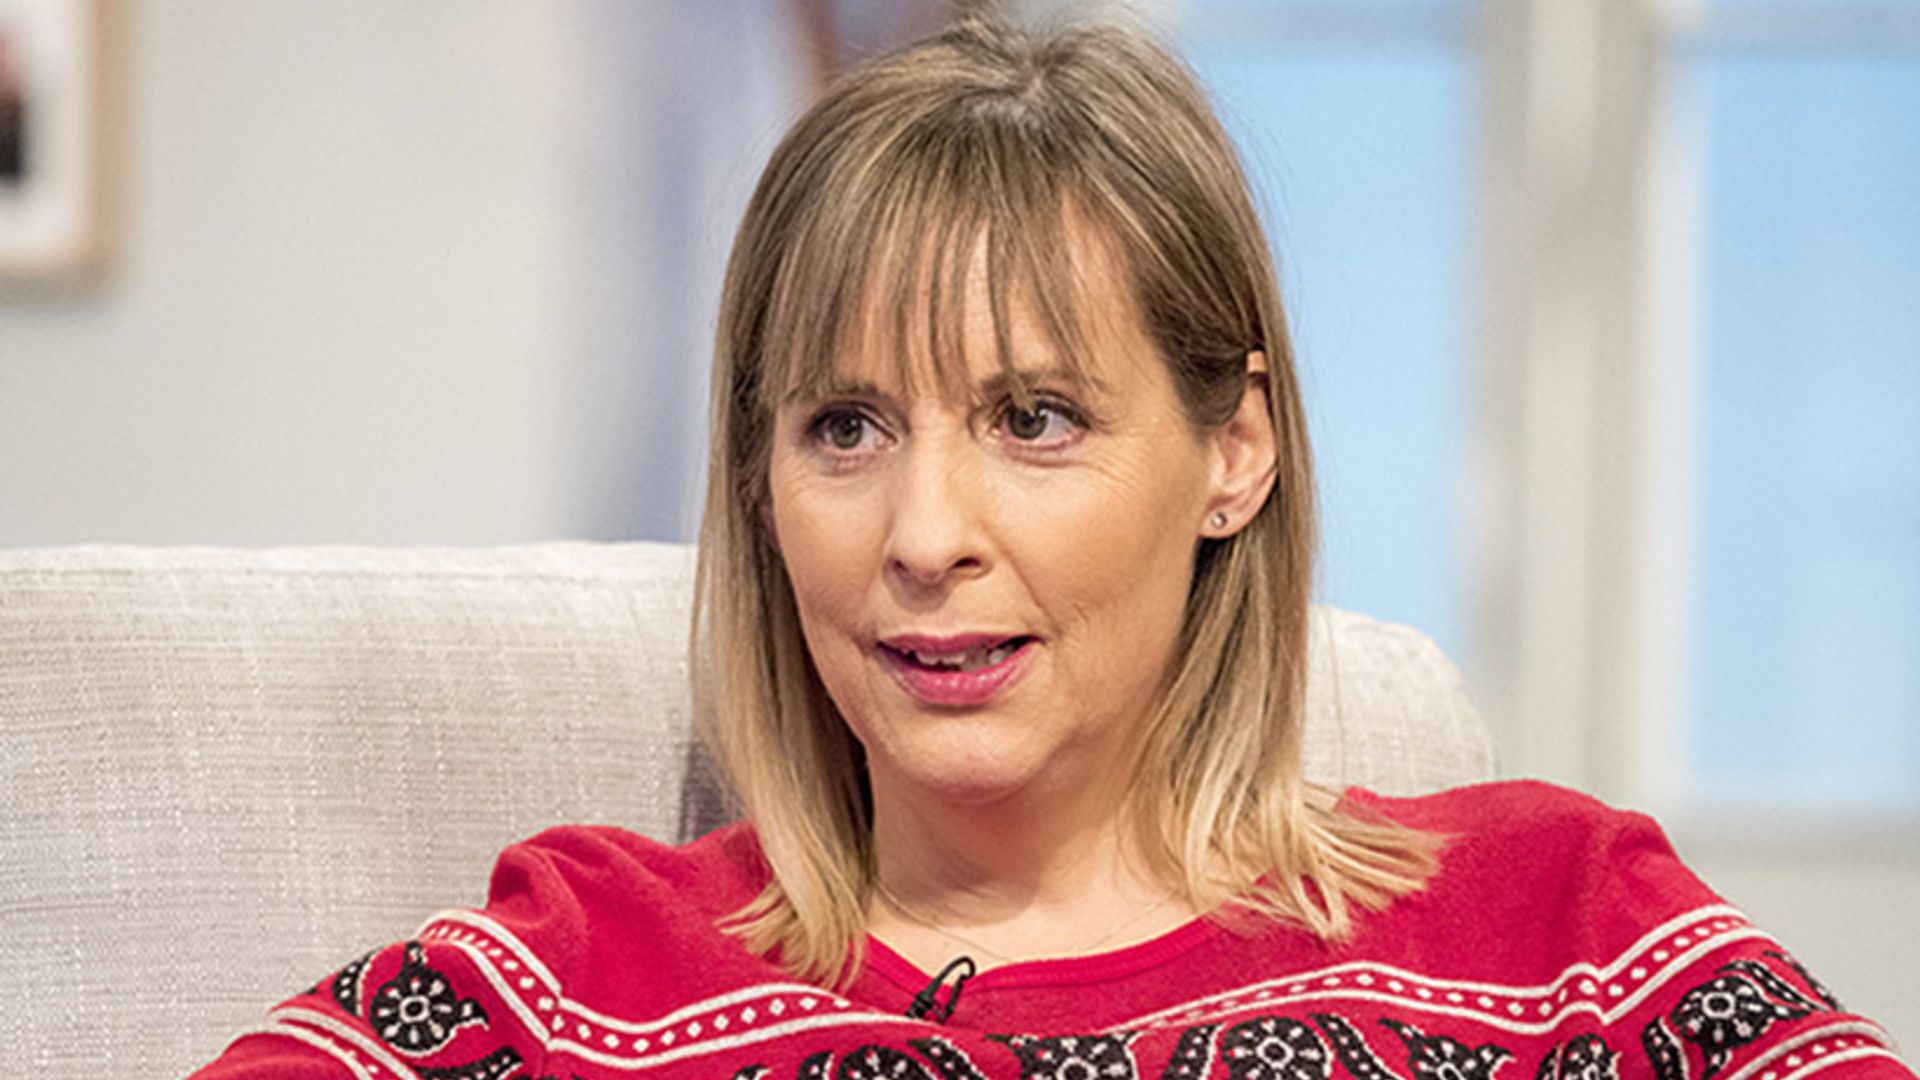 Former Bake Off host Mel Giedroyc to front major new show without Sue Perkins – find out more